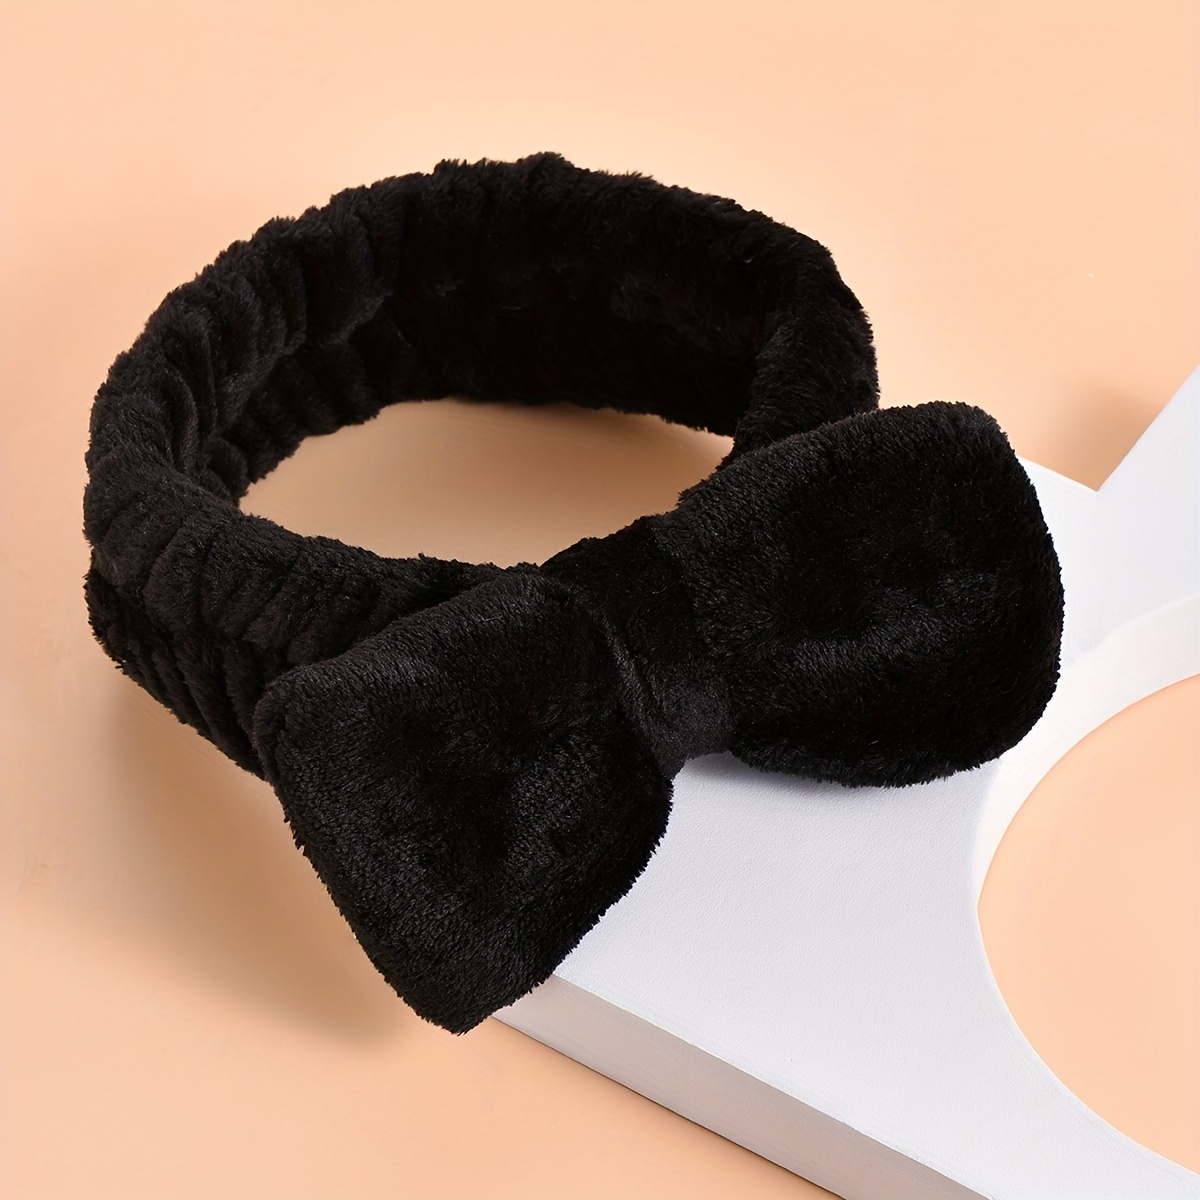 

Plush Bowknot Hair Band For Washing Face, 1pc, Soft Fleece Headband With Elastic For Skincare Routine, Makeup, Spa, Black